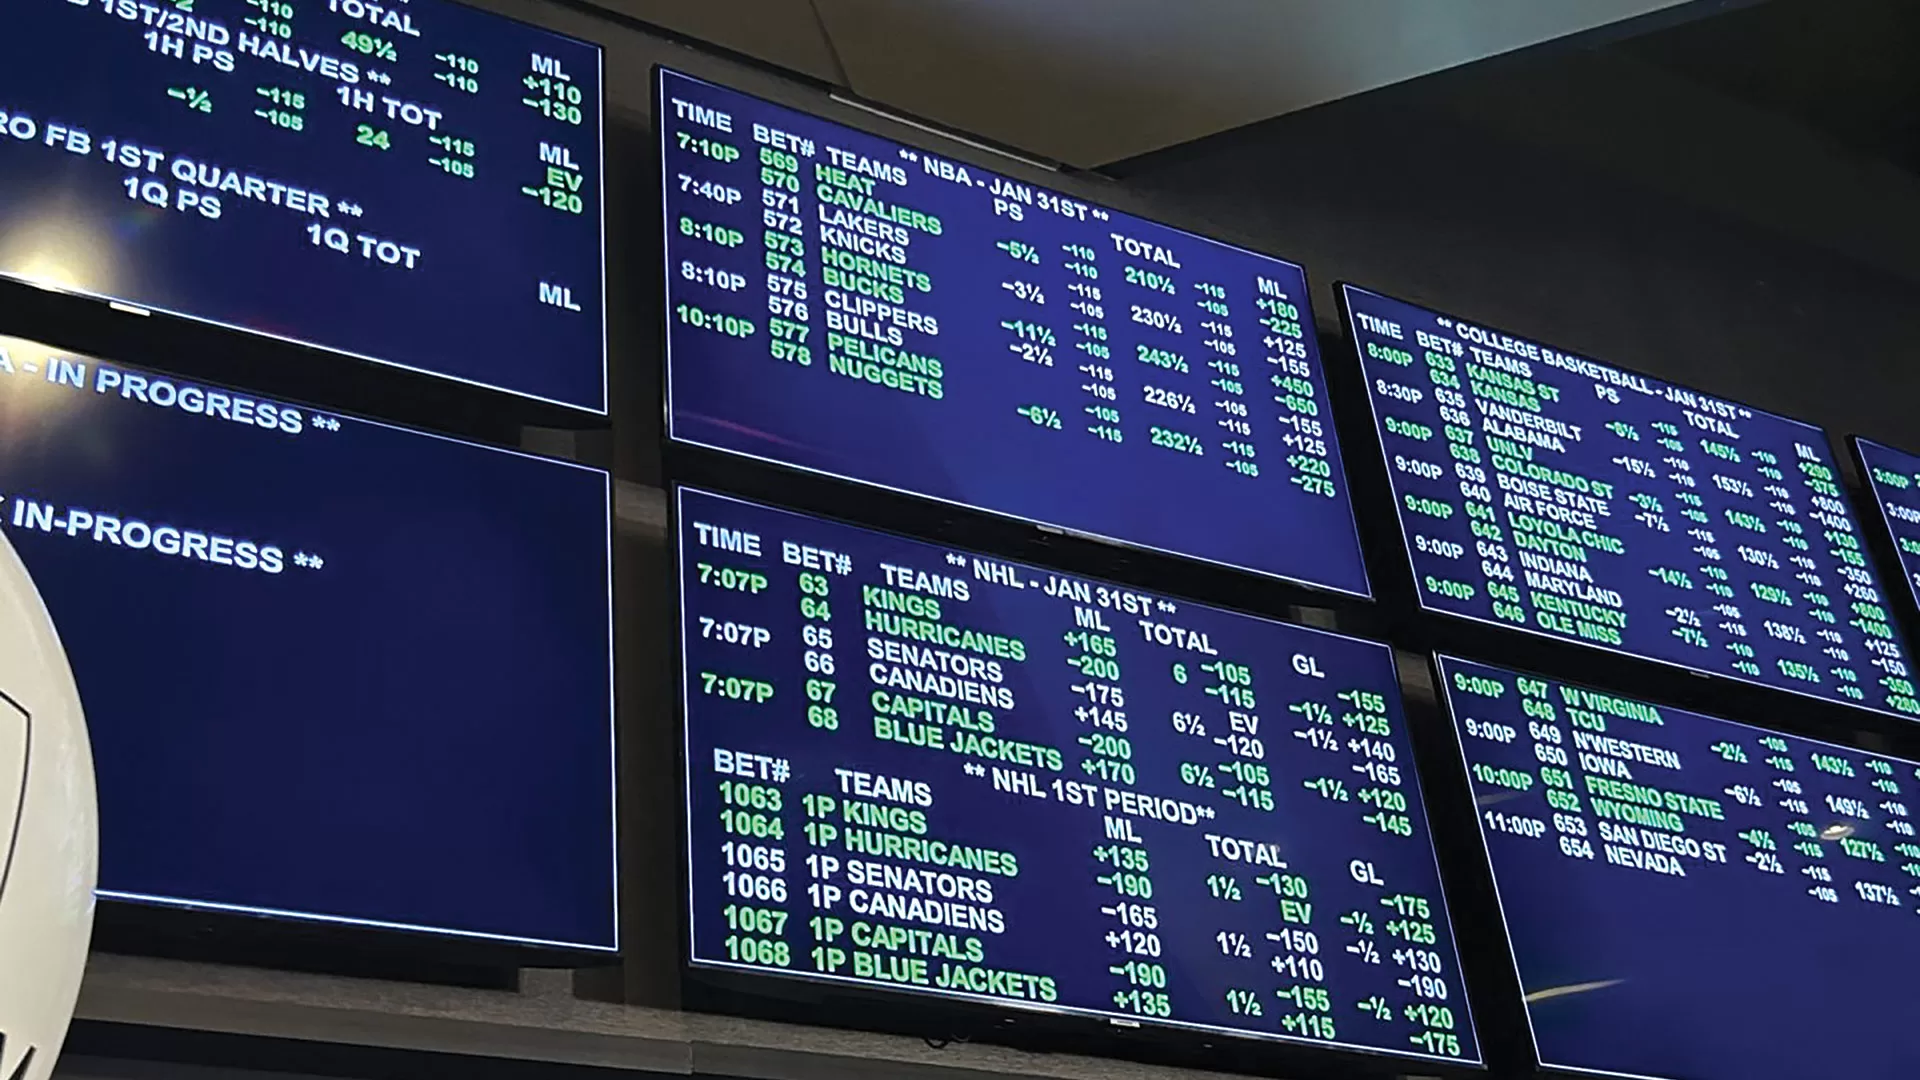 Springfield’s newest gaming option: sports betting.